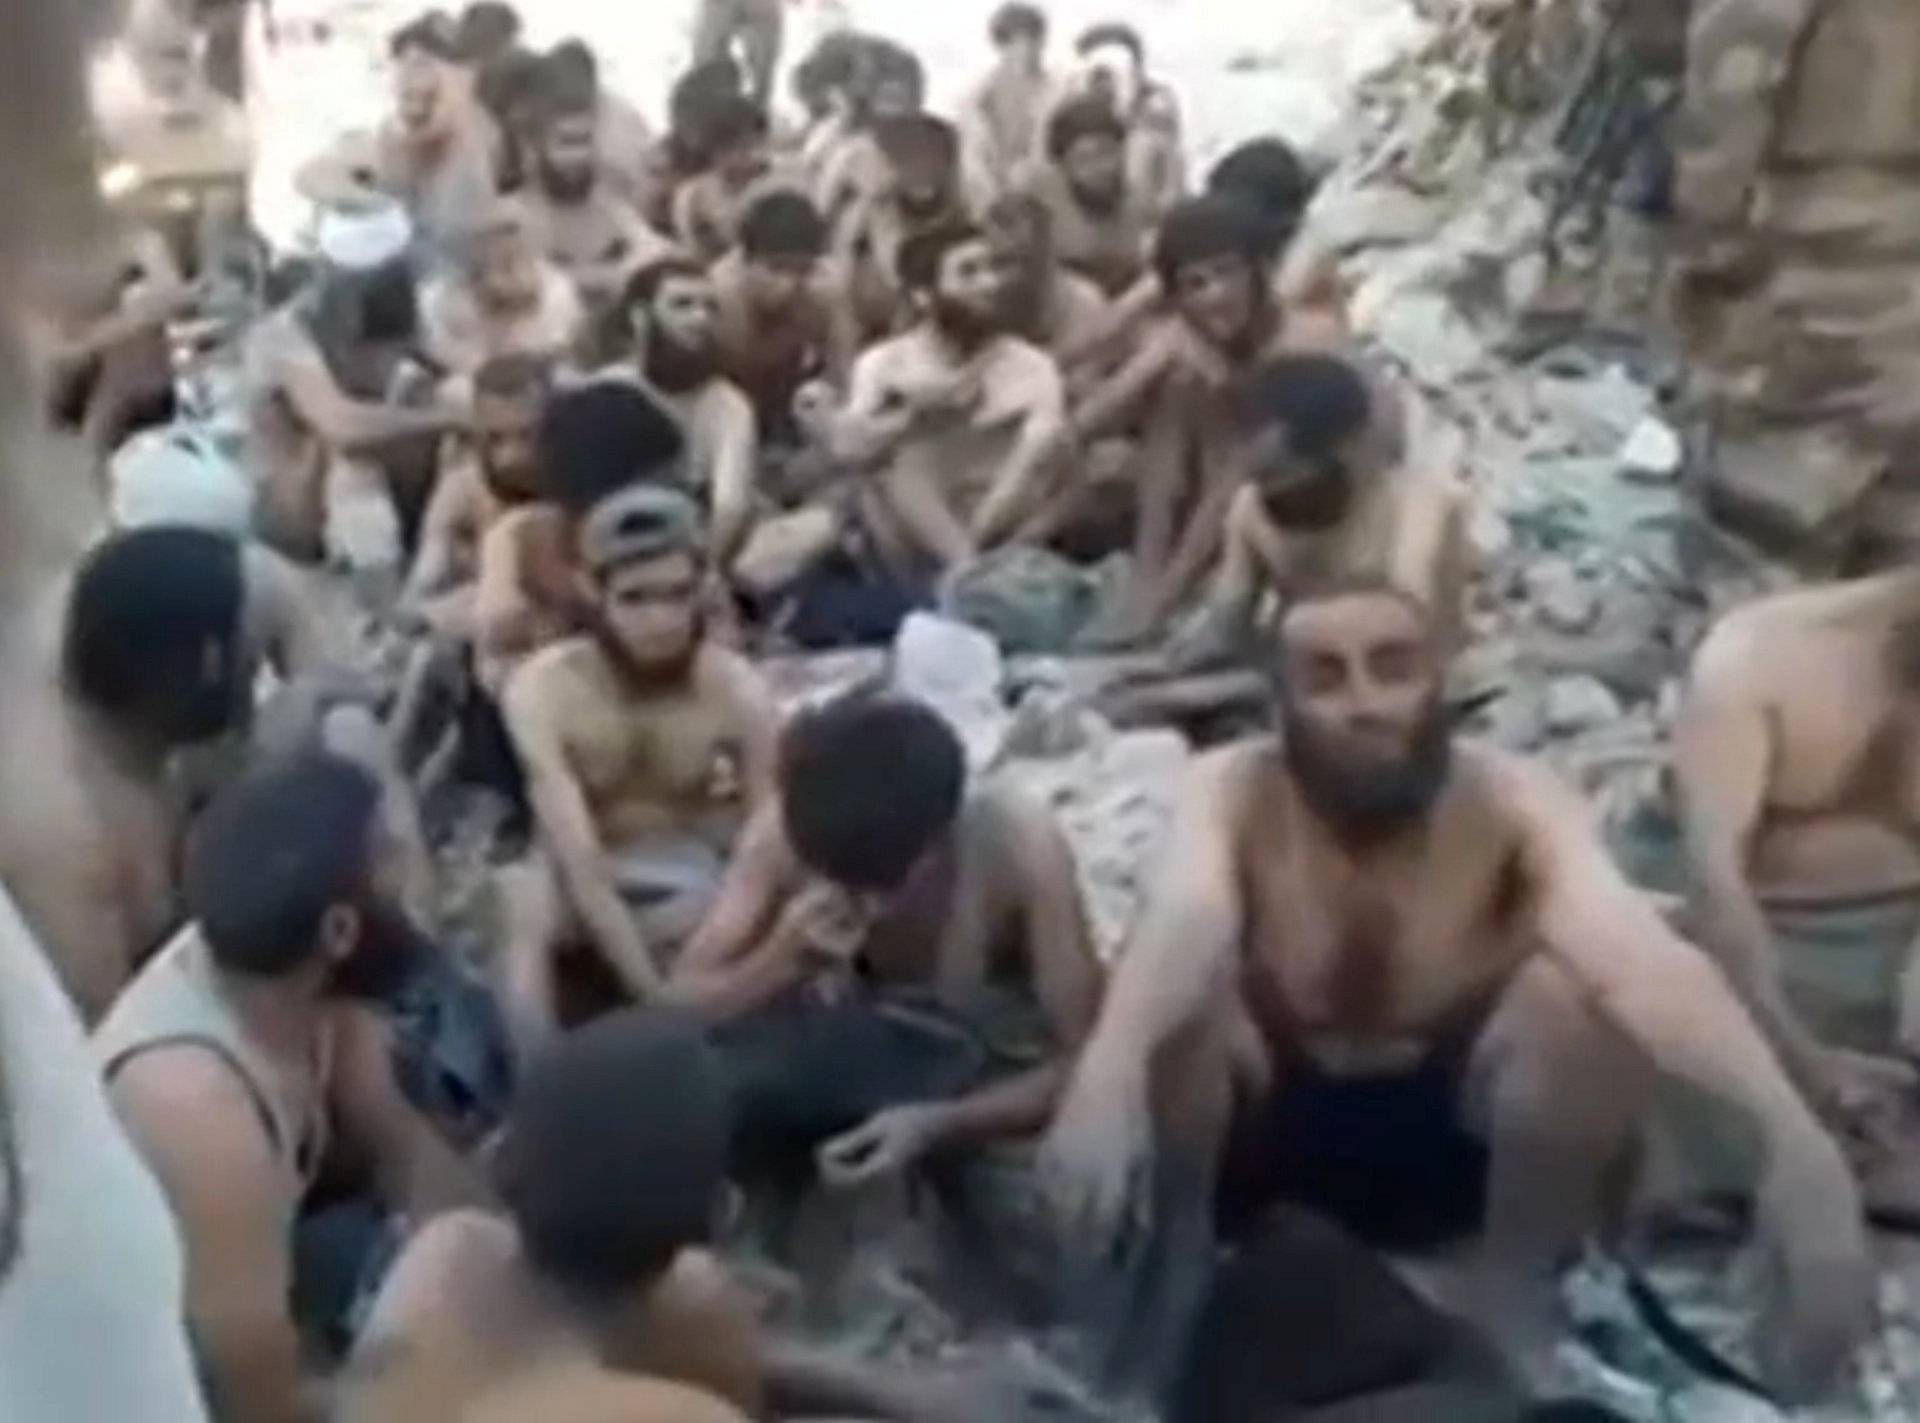 Still image taken from a video shows Islamic State militants surrender in the Old City of Mosul